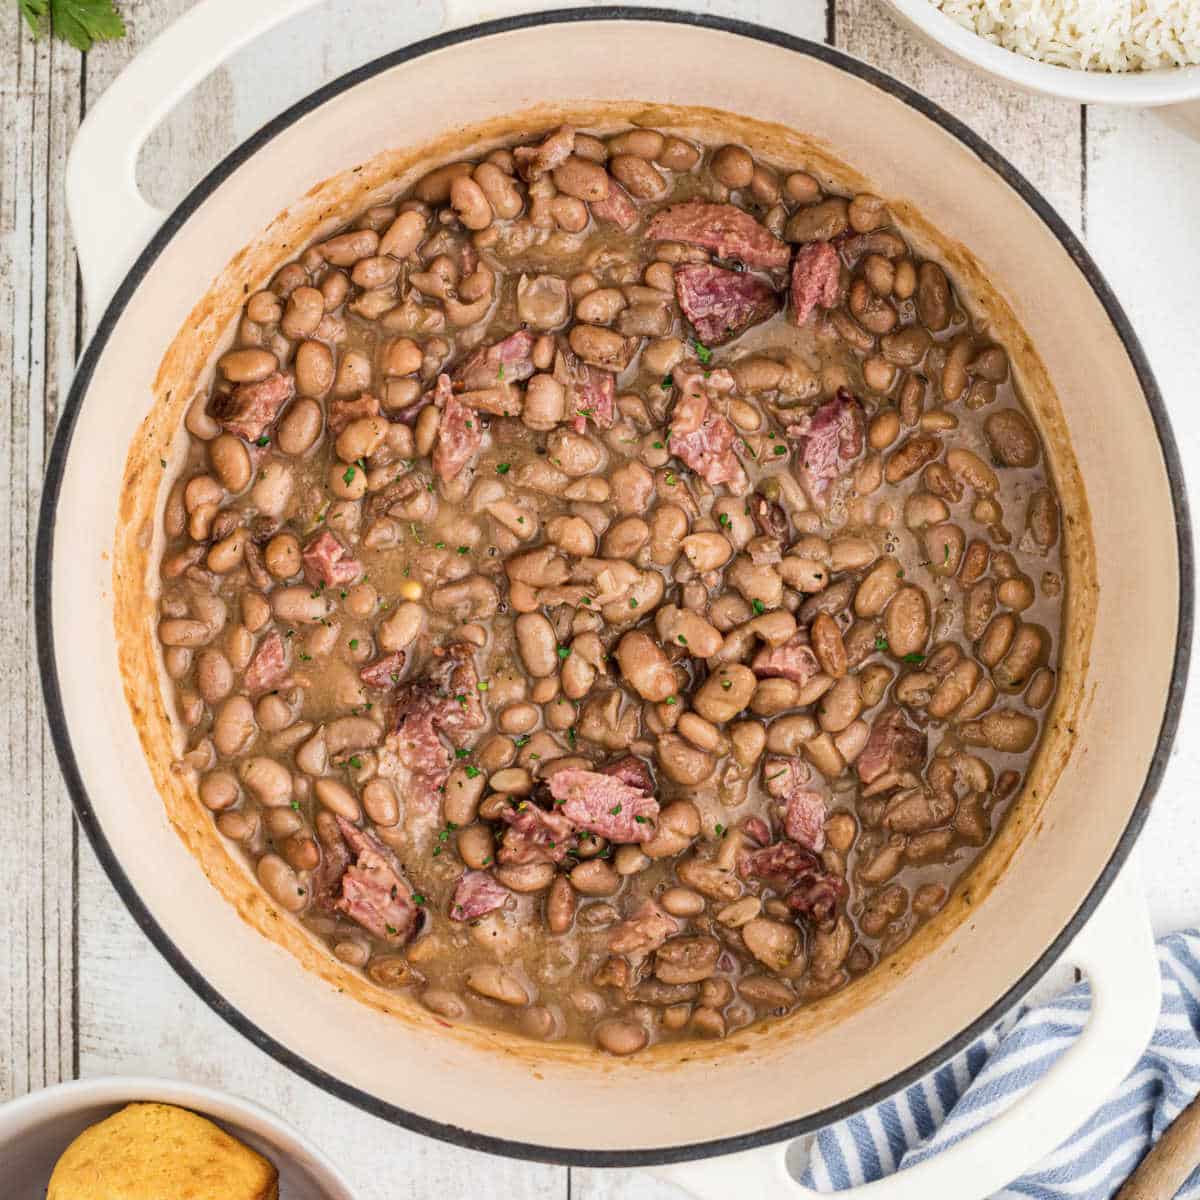 Overhead shot of a pot of pinto beans, cropped square.